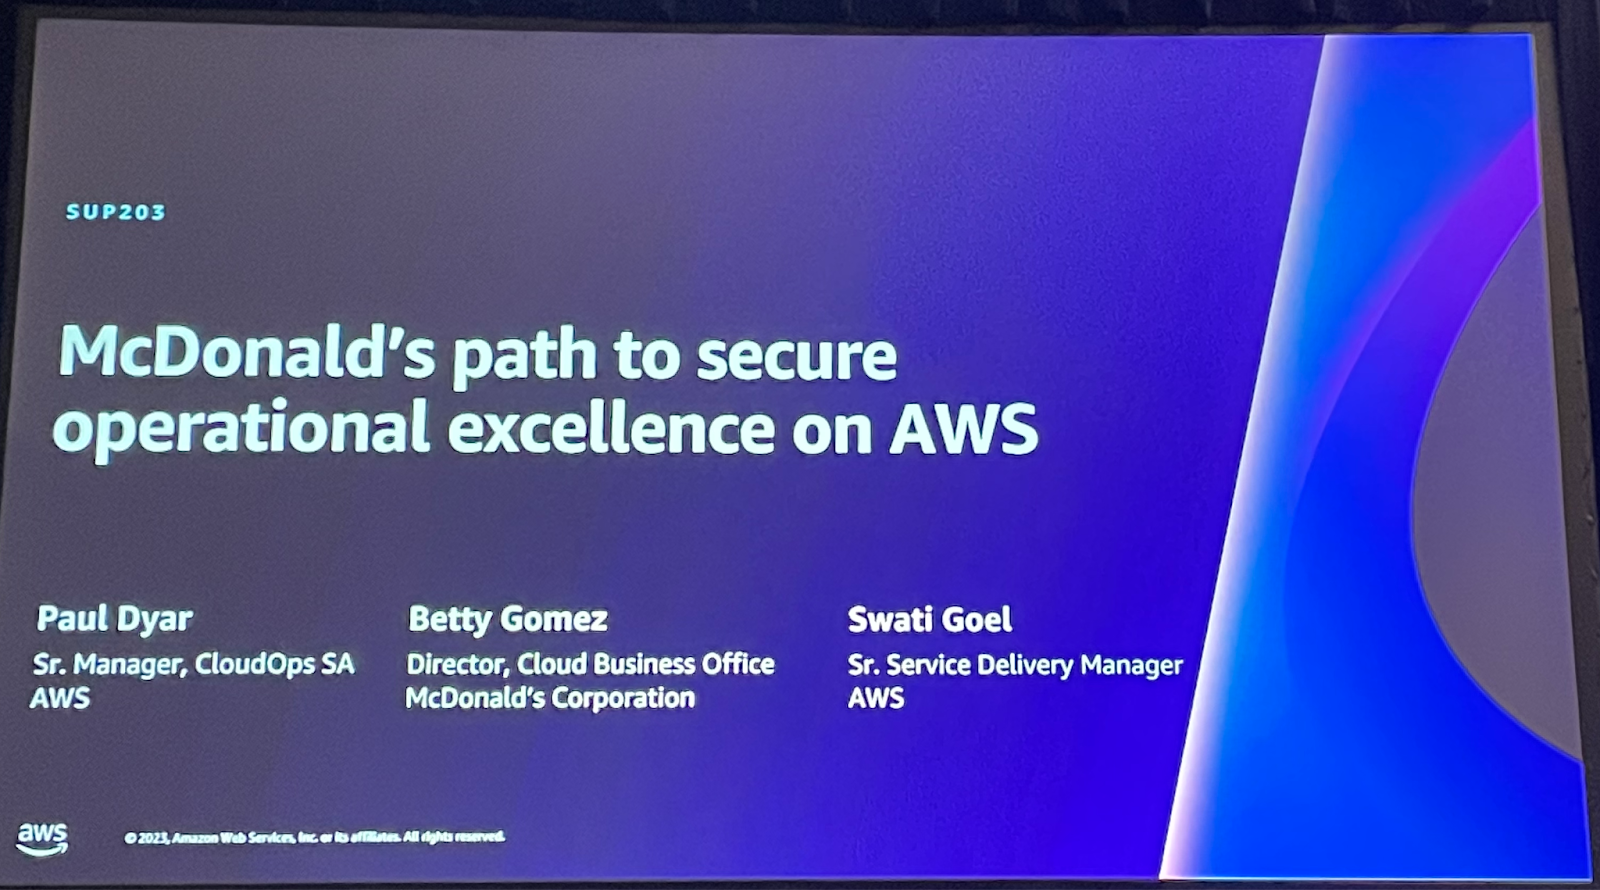 McDonald’s path to secure operational excellence on AWS